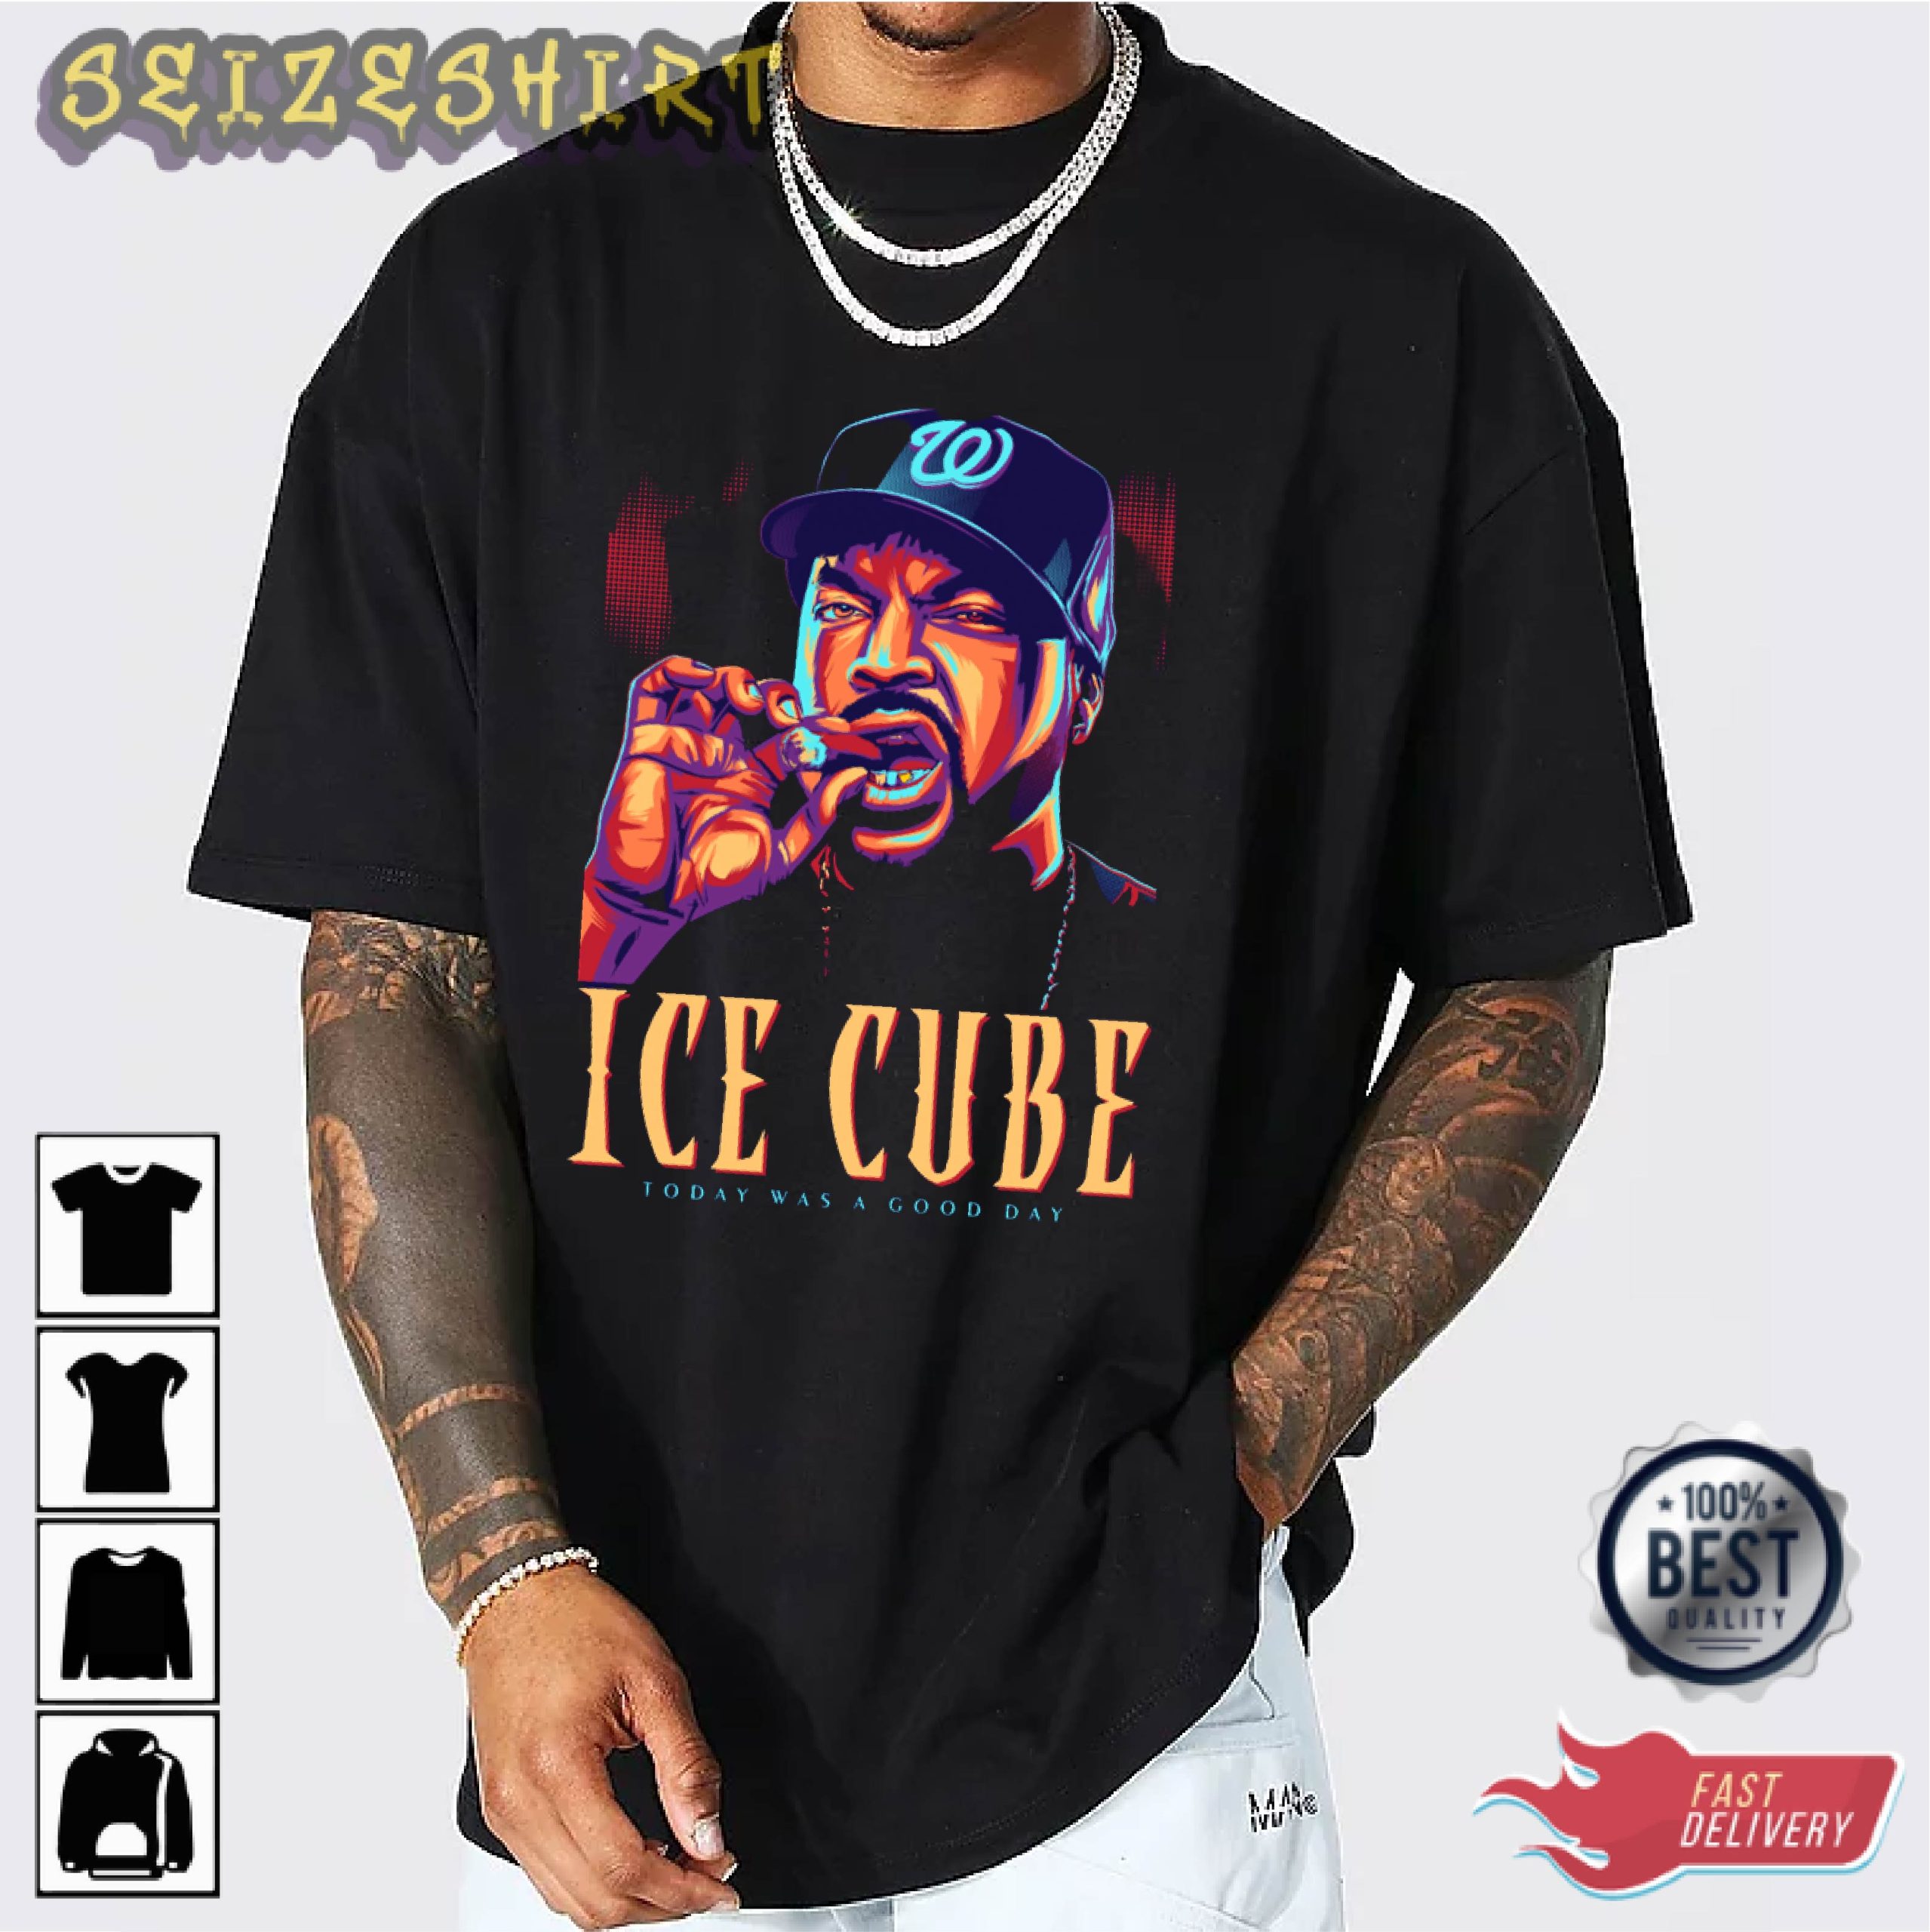 Ice Cube Best Trending Graphic Tee Long Sleeve Shirt